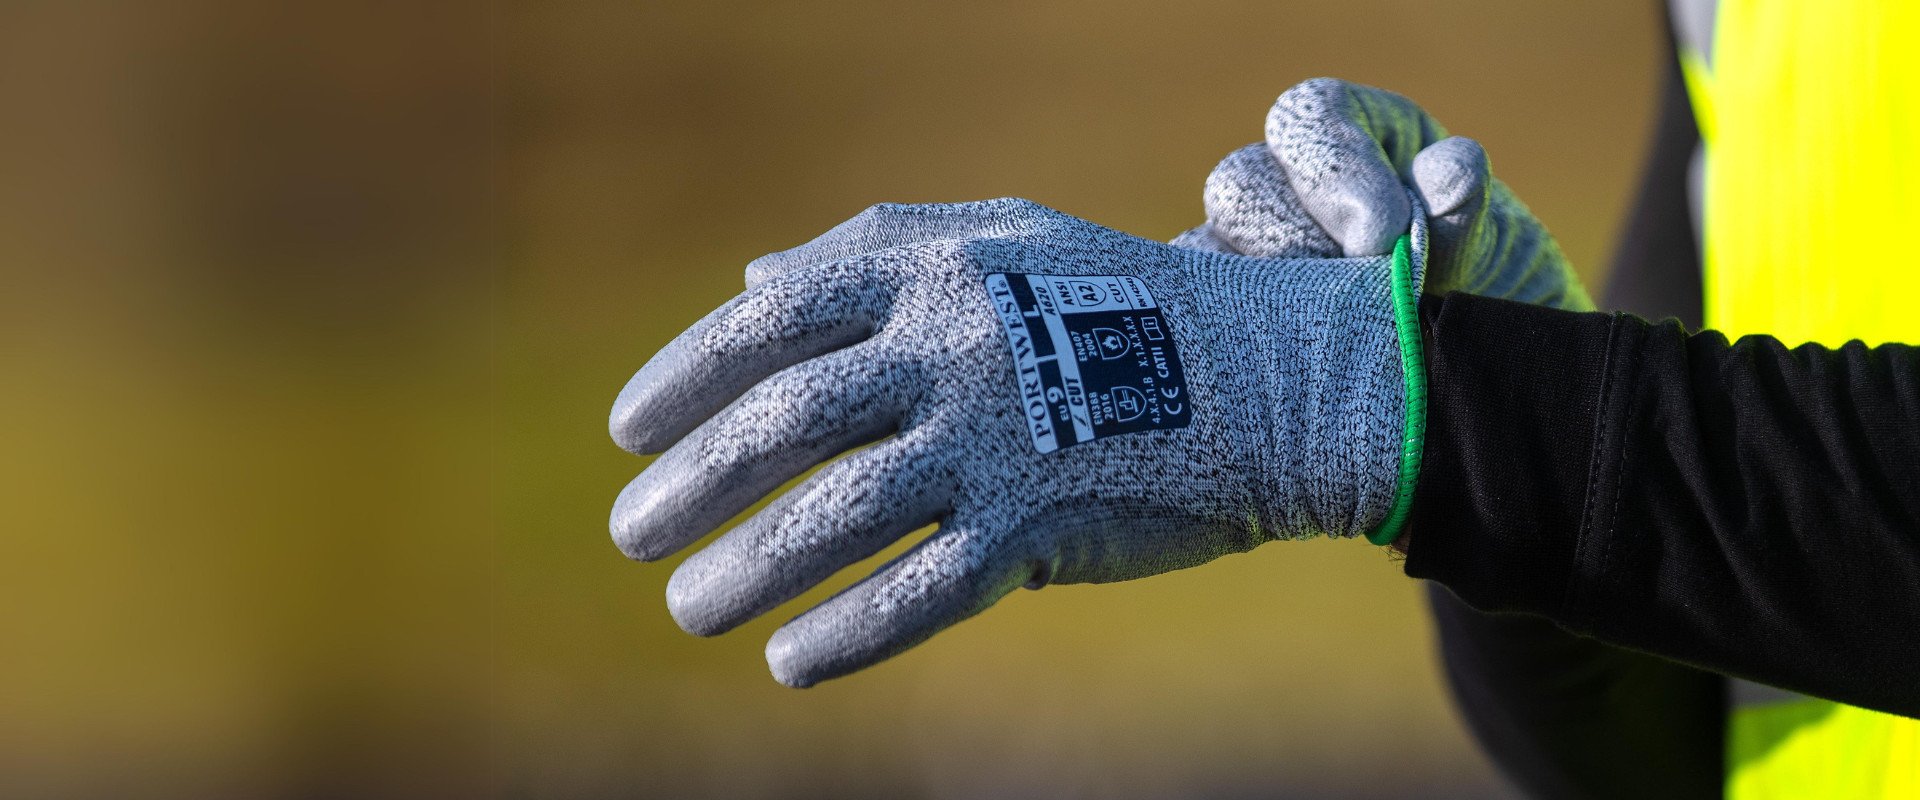 one hand in a working glove over a blurred background